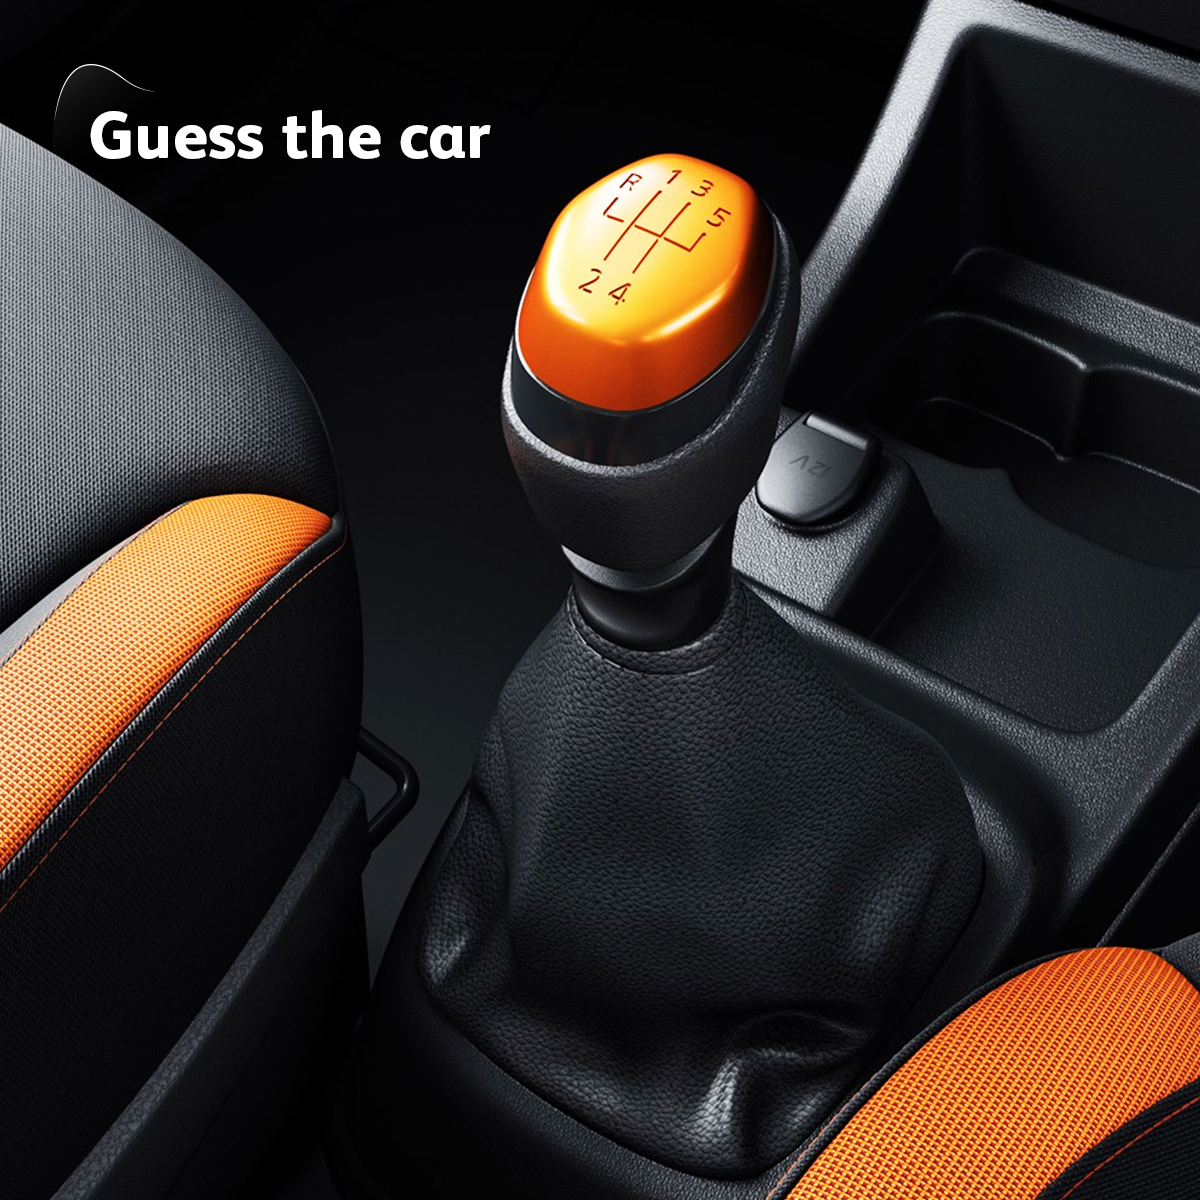 #GuessTheCar Can you recognise this hot hatch from its close-up? Did you know that your gear lever can be a secret weapon for reducing your fuel consumption? The engine uses less fuel when it's running at its most efficient, so change gears frequently to keep your revs low.